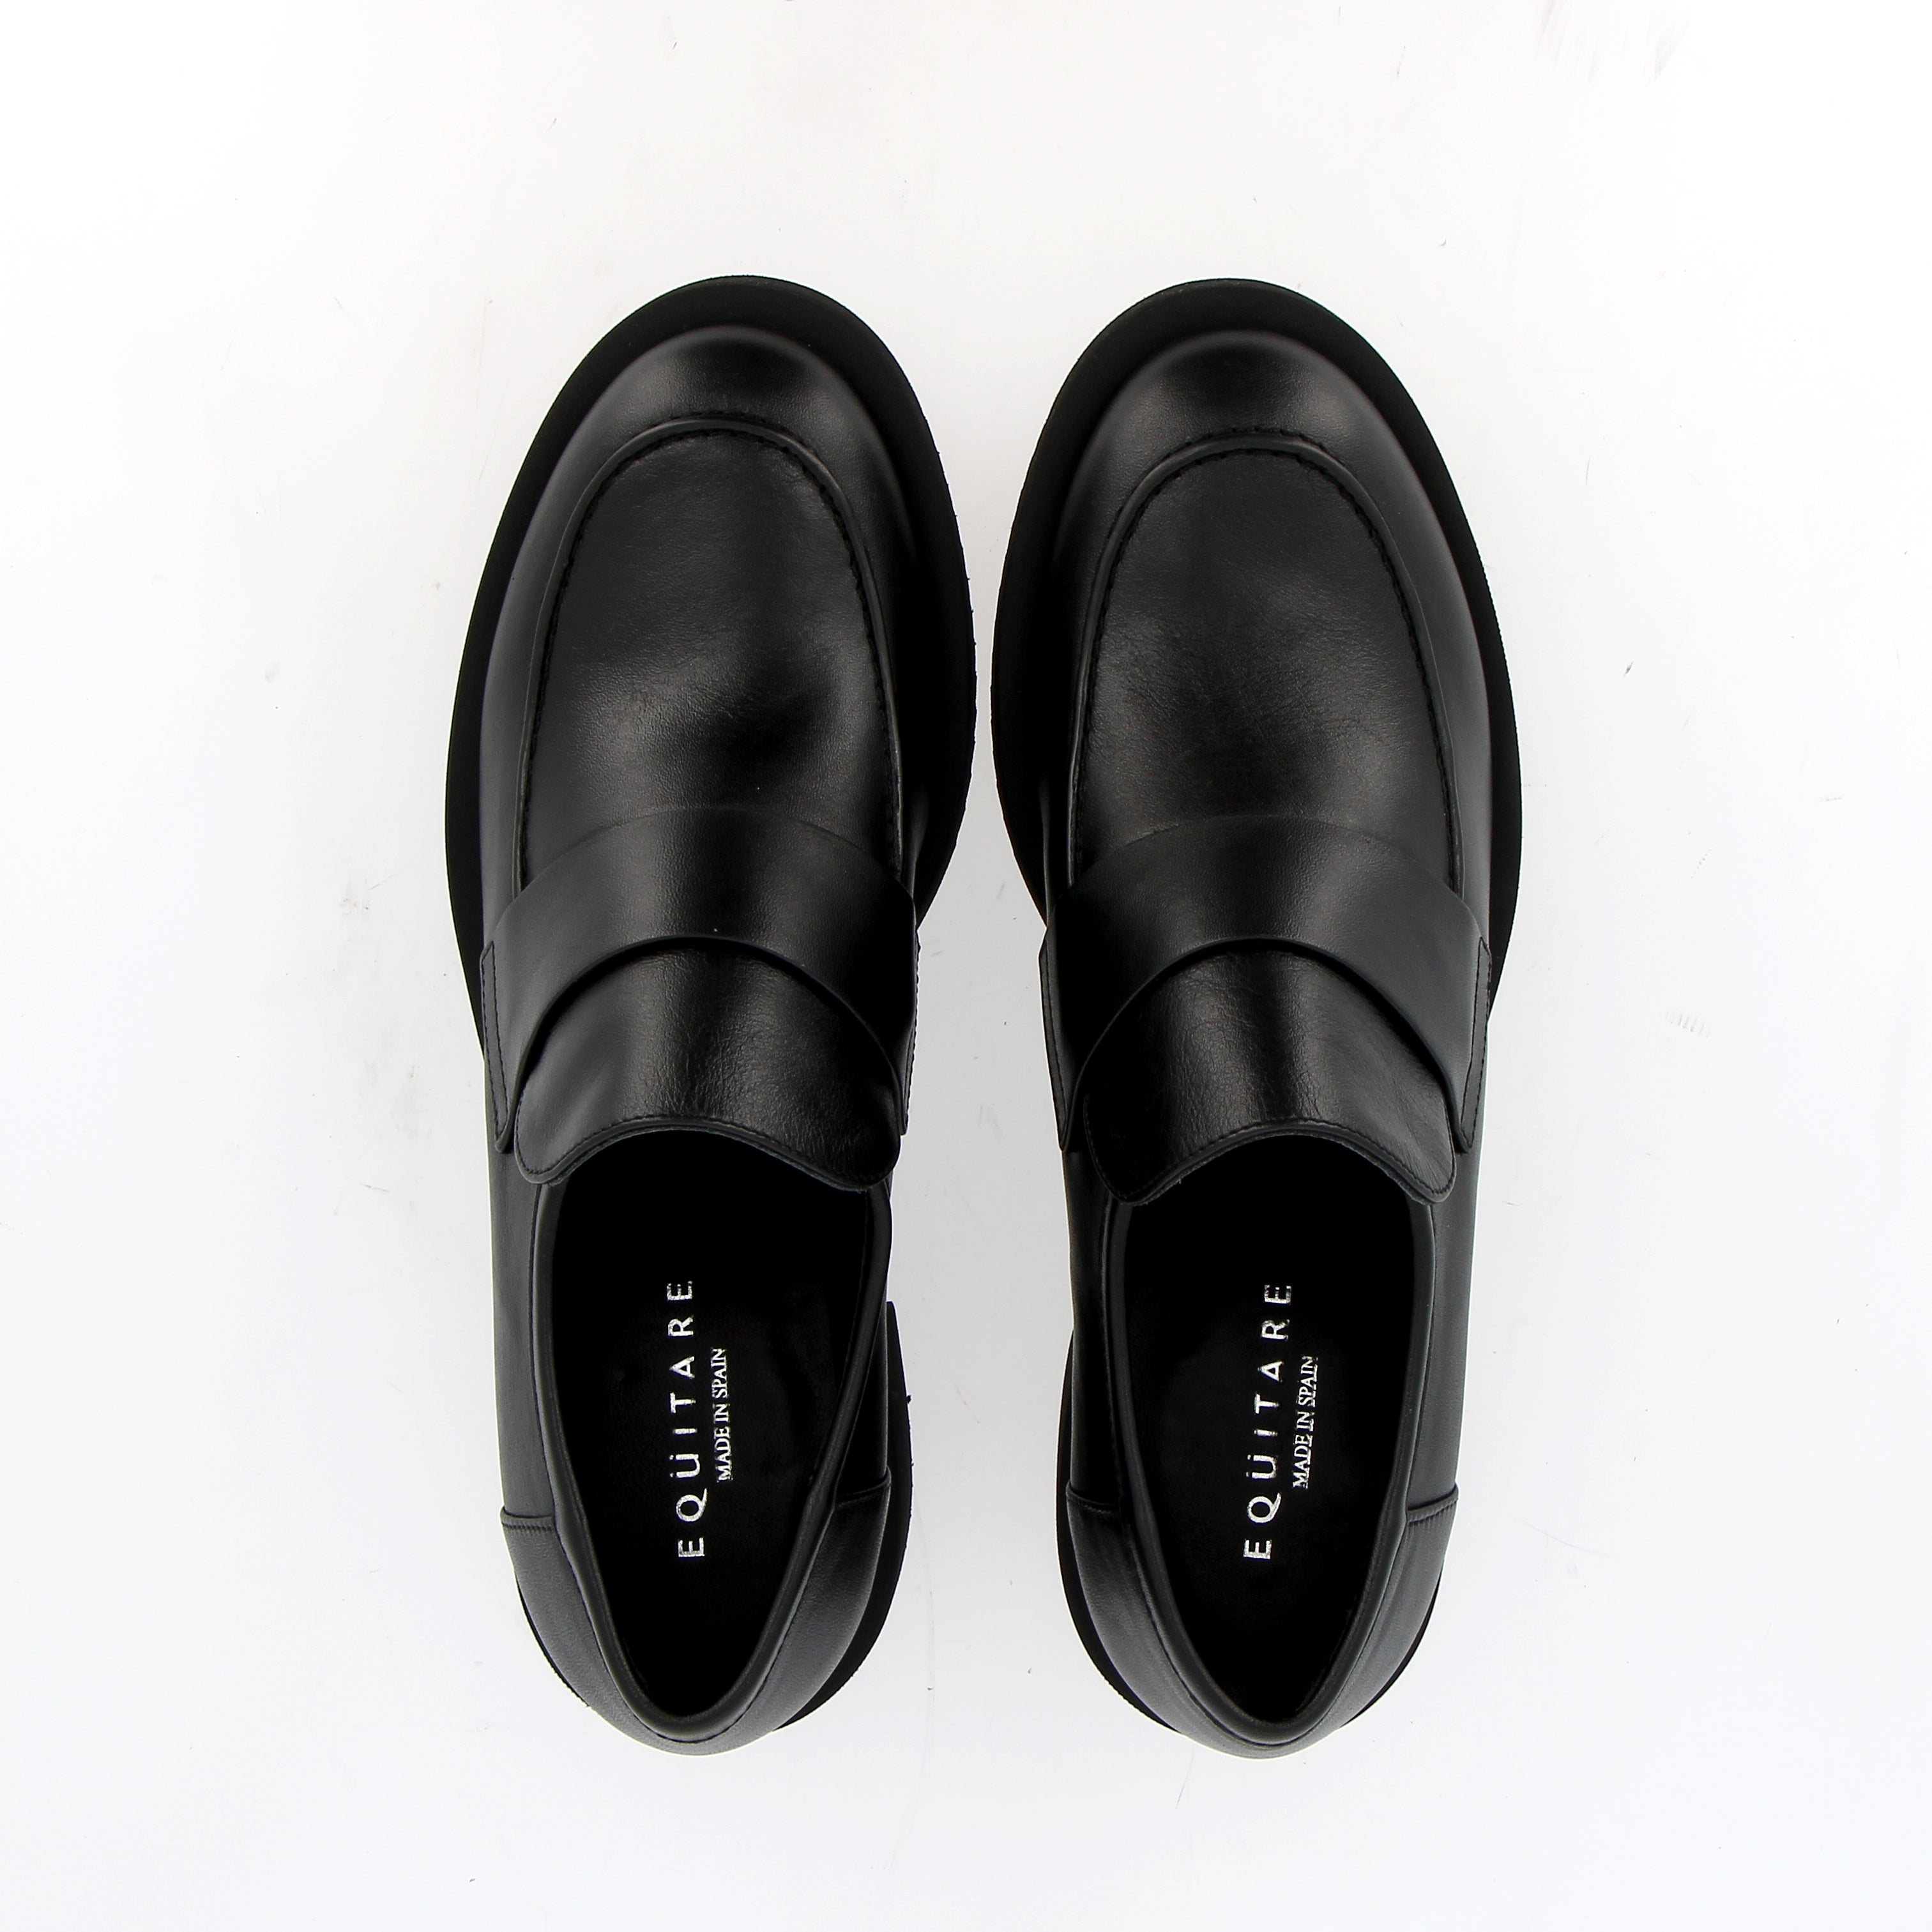 Black calf leather loafer with low heel